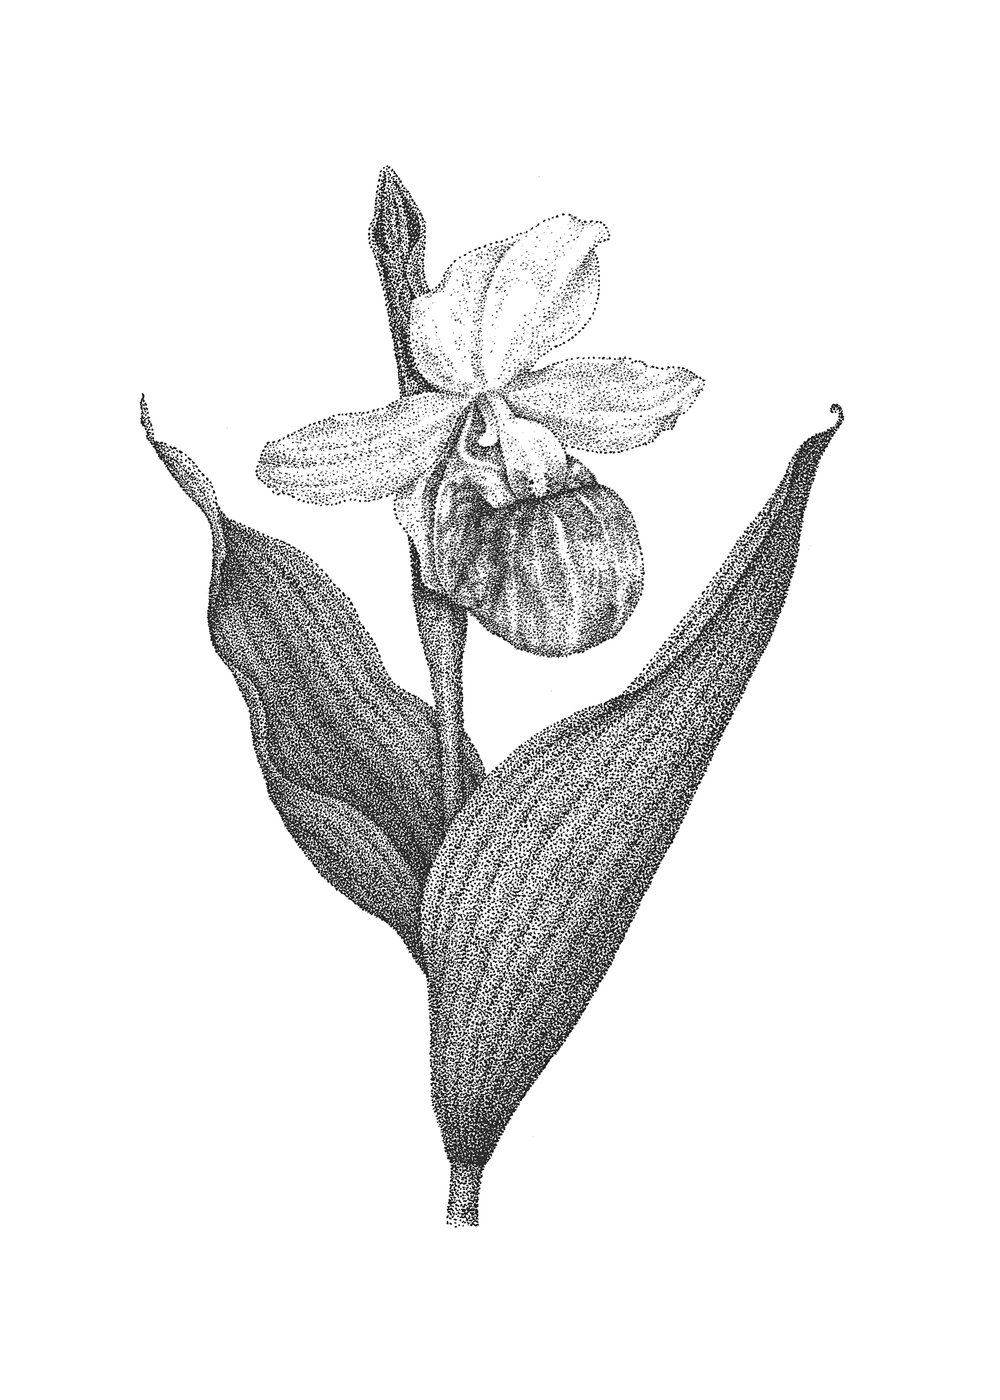 Image of Showy Lady's Slipper